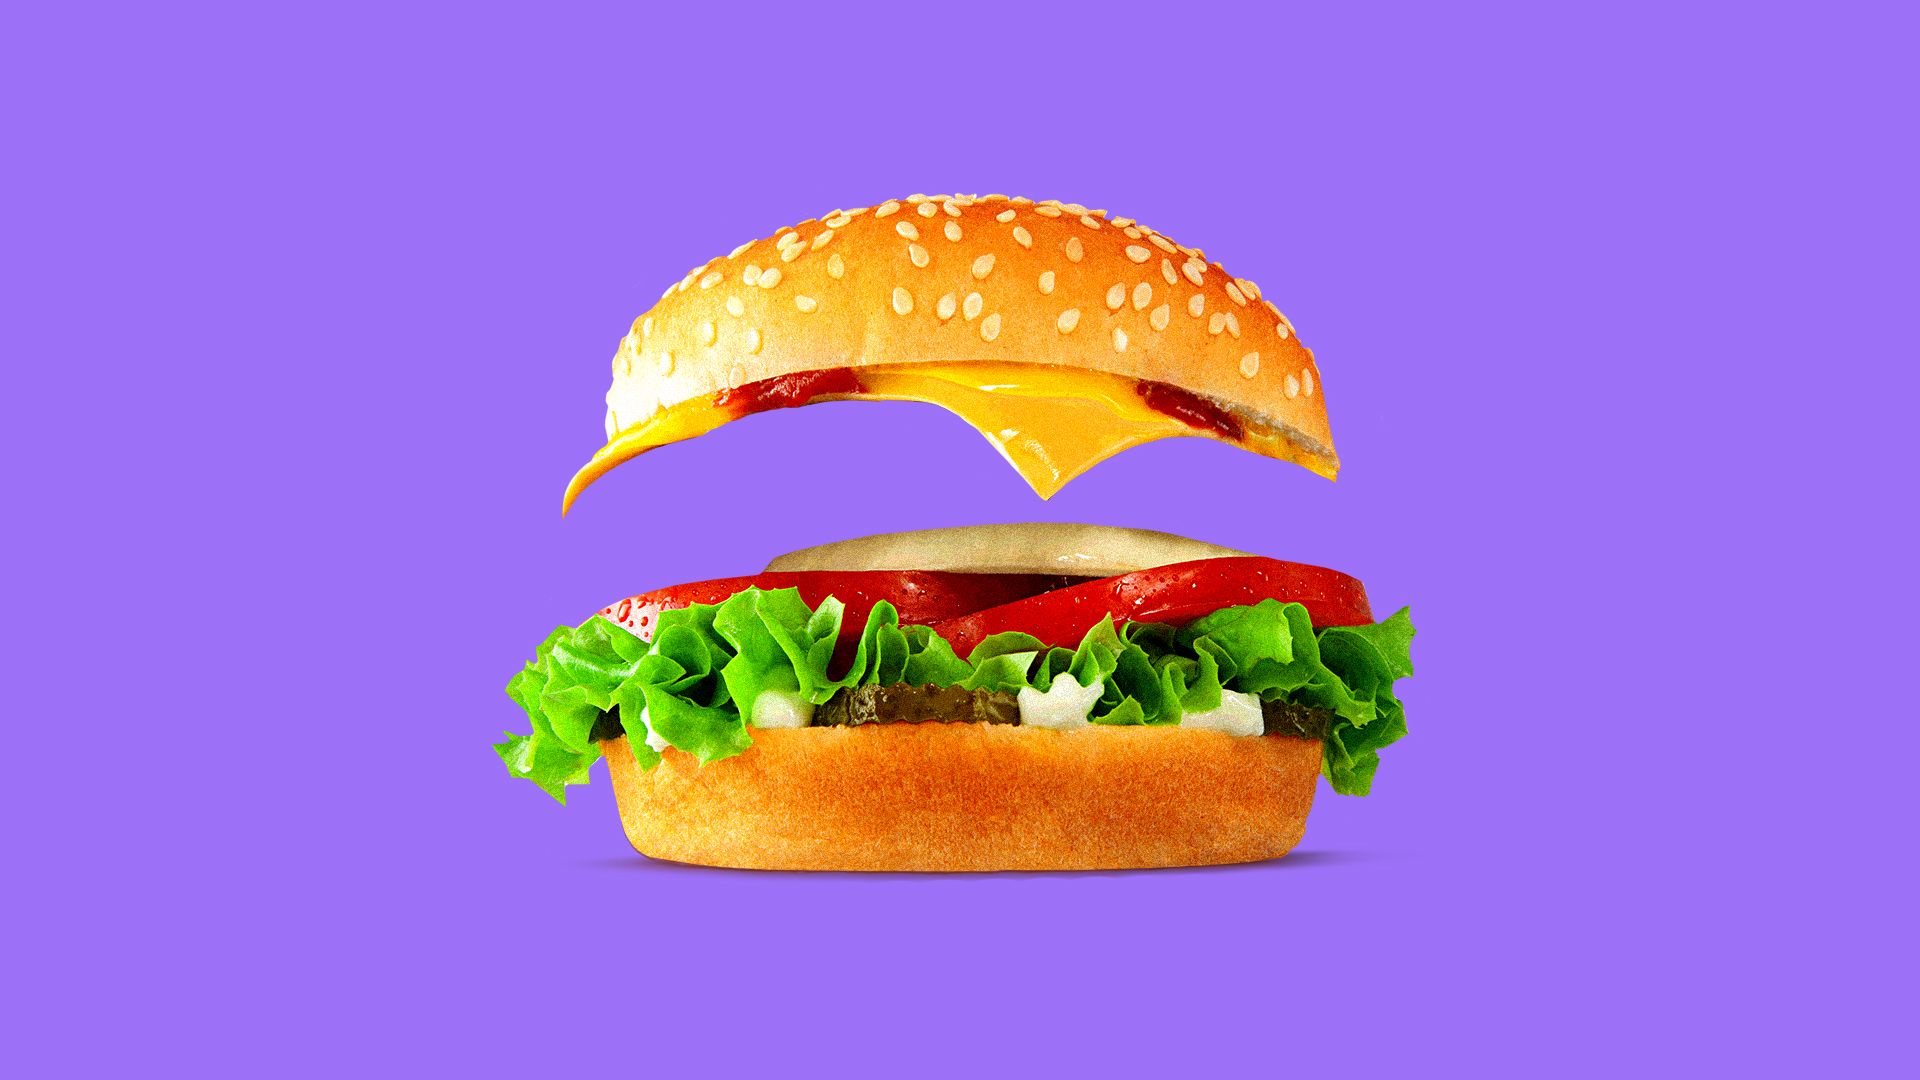 This is an illustration of a burger that is missing a patty